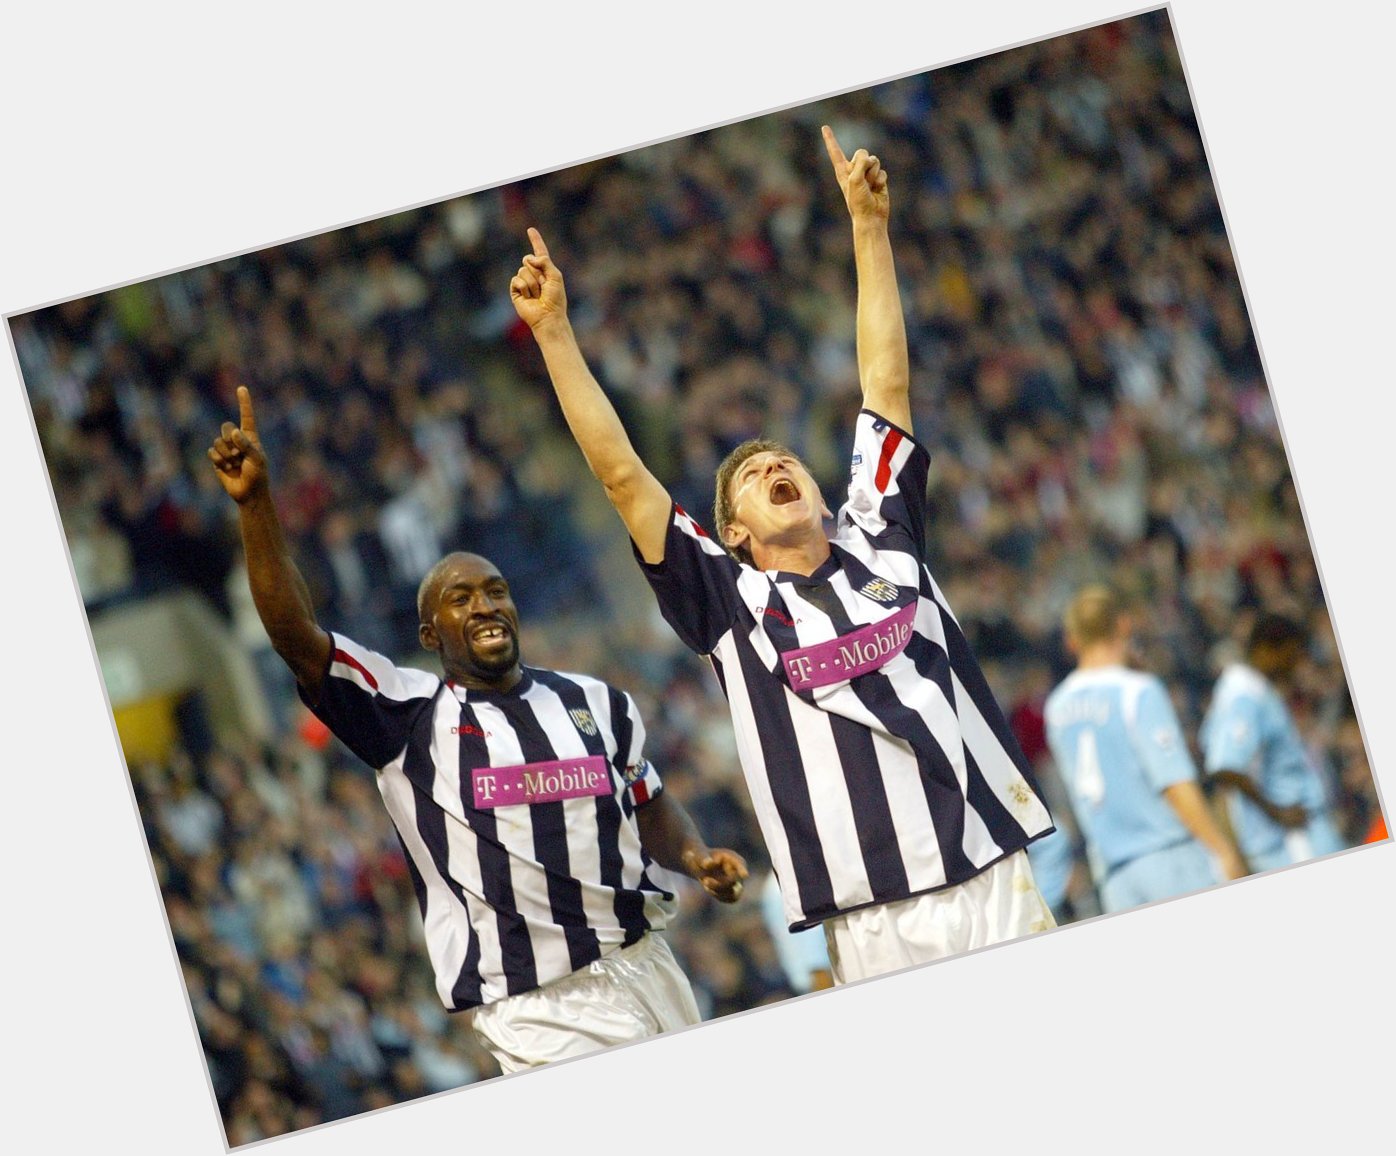 Happy Birthday to Zoltan Gera, who played over 180 games for the Baggies  